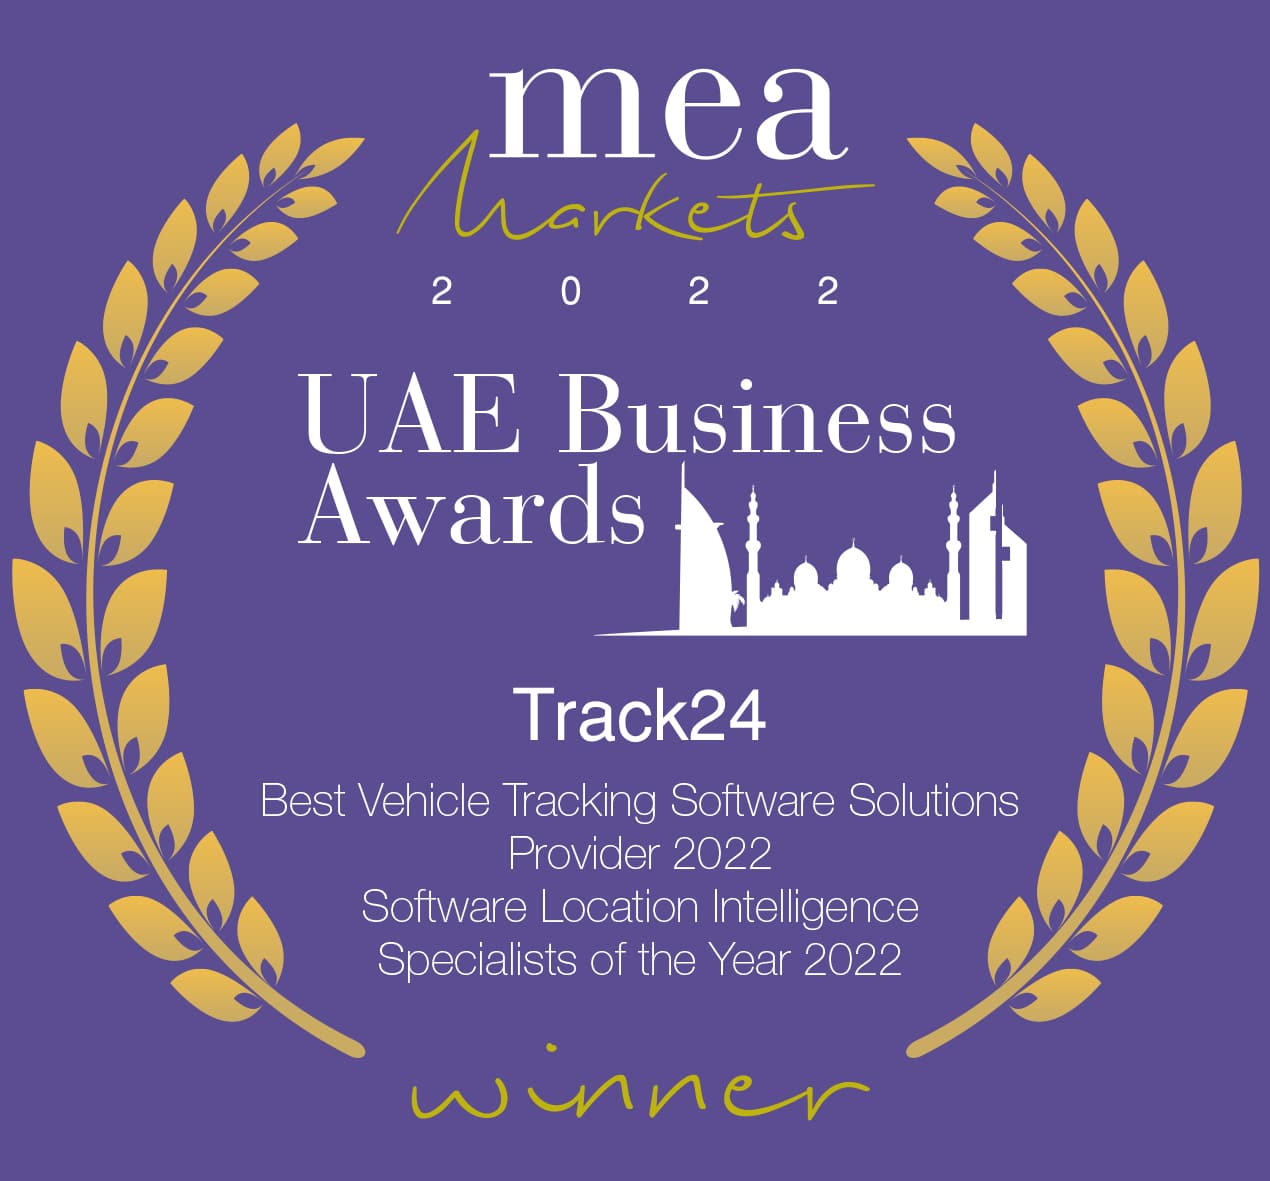 MEA Markets UAE Business Awards Software Location Intelligence Specialists of the Year 2022